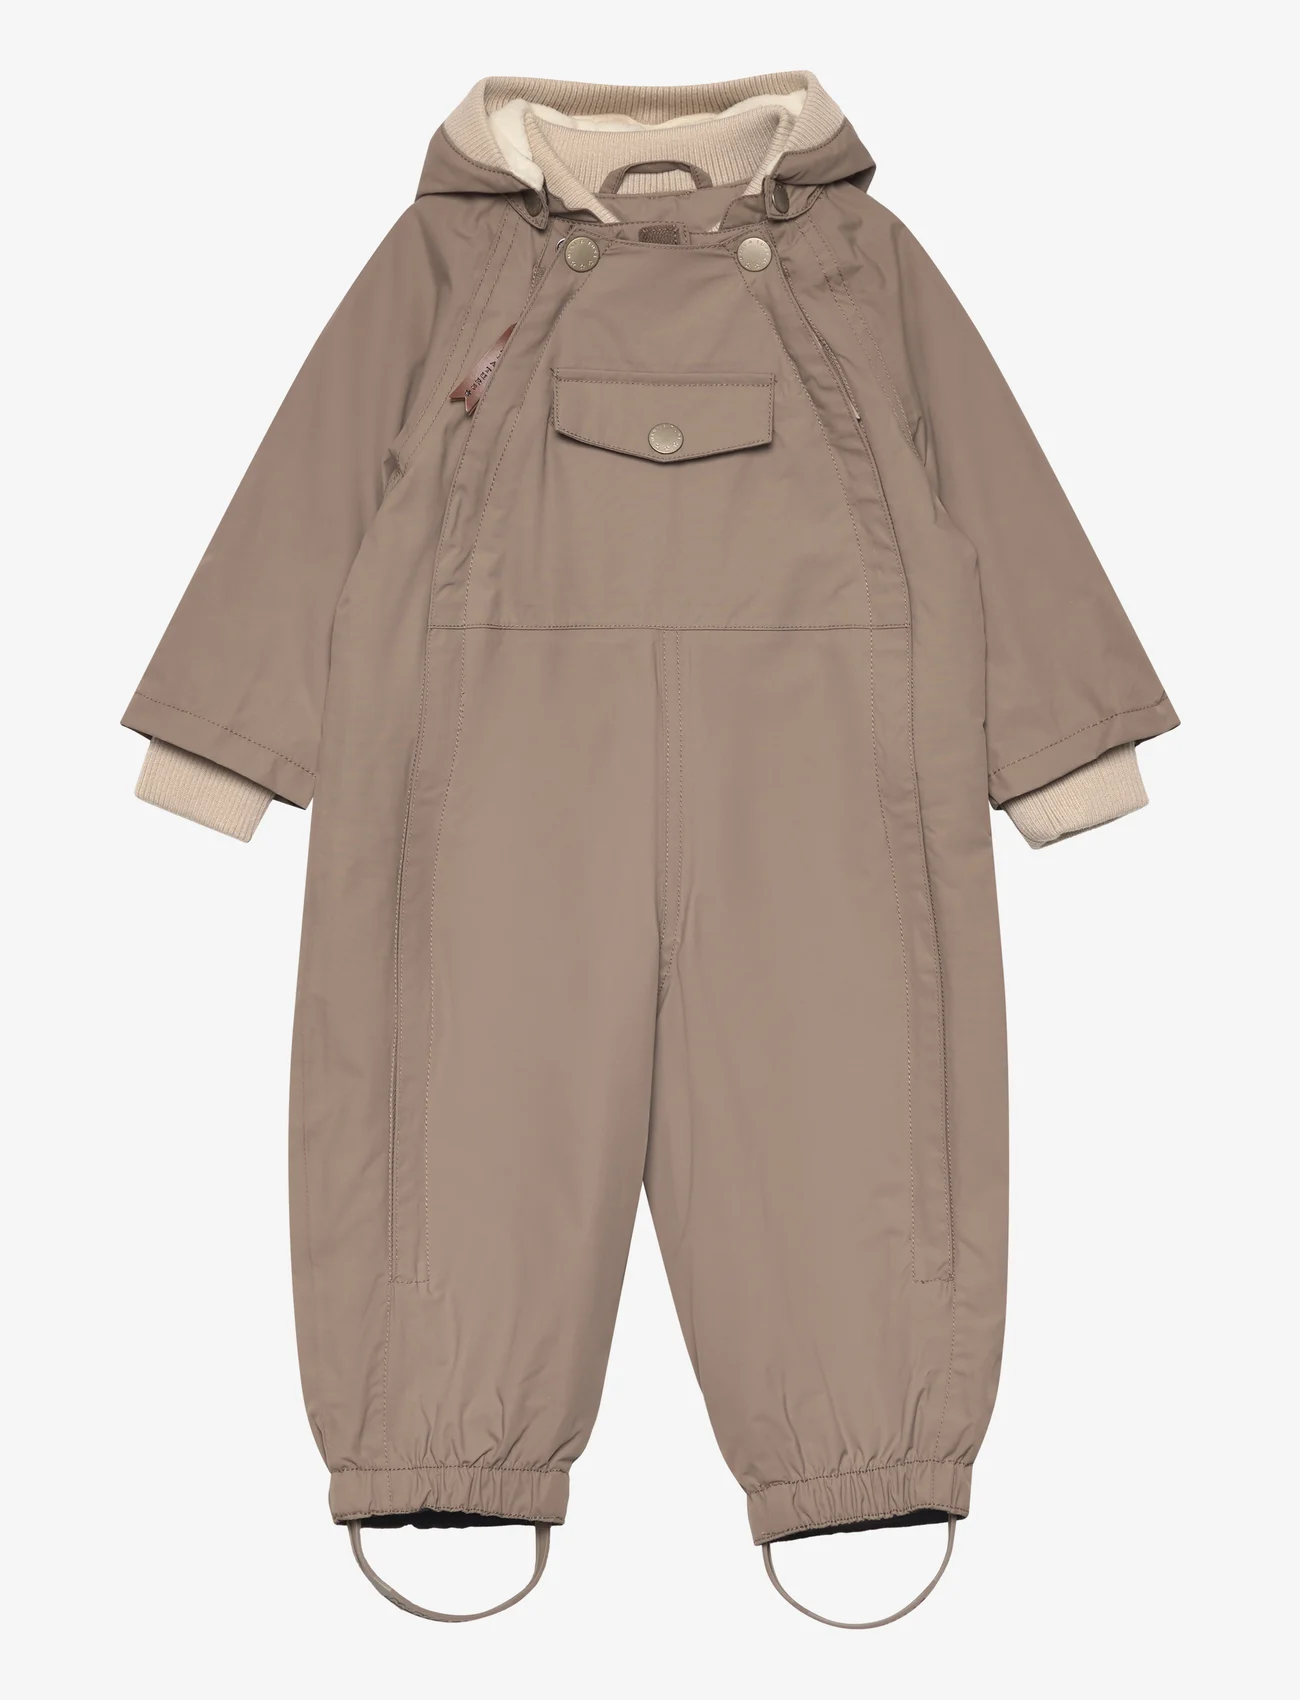 Mini A Ture - MATWISTO fleece lined spring coverall. GRS - shell coveralls - pine bark - 0